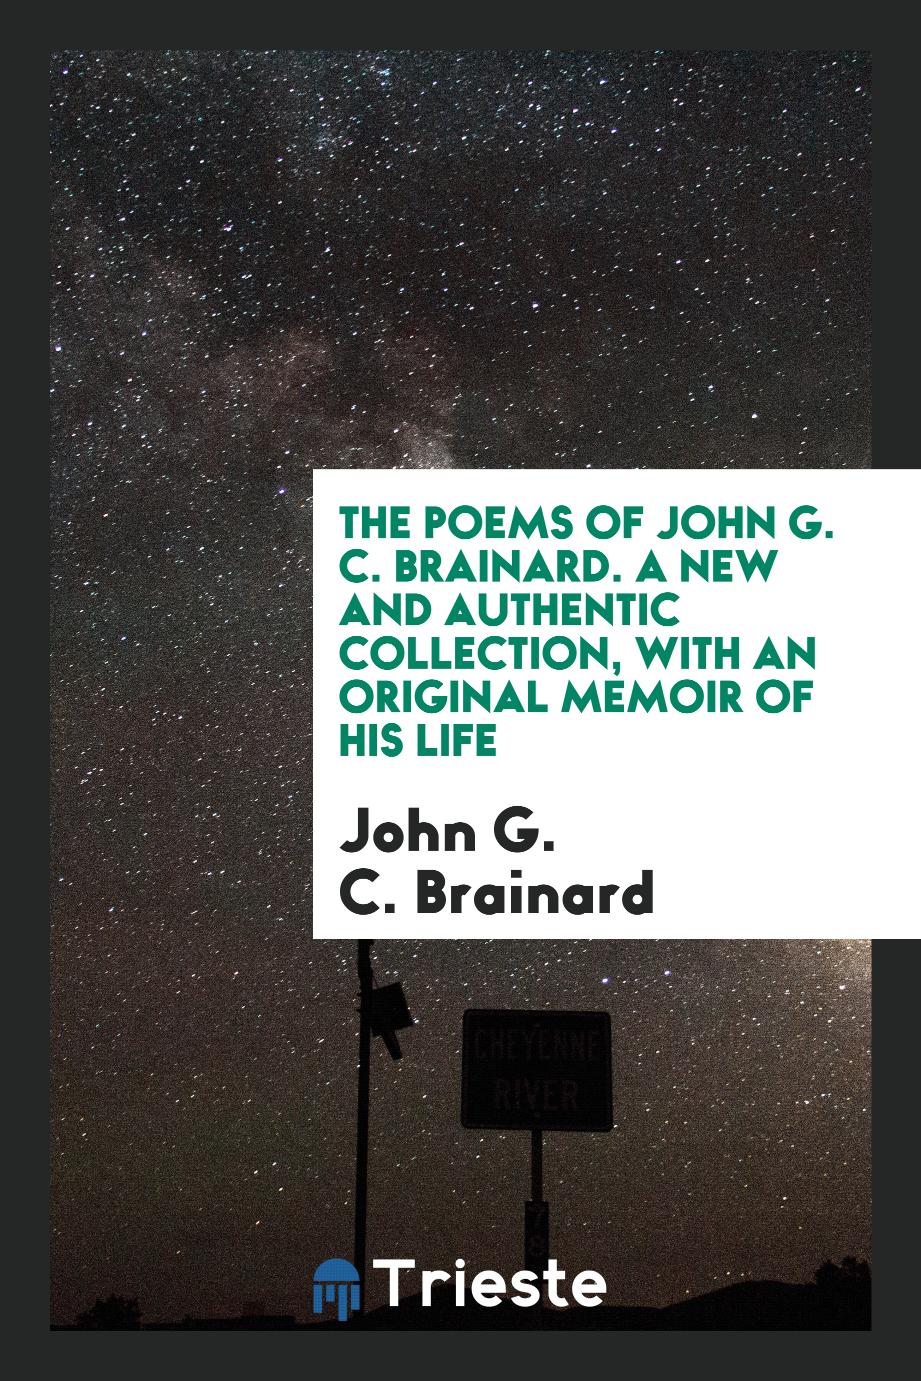 The Poems of John G. C. Brainard. A new and authentic collection, with an original memoir of his life